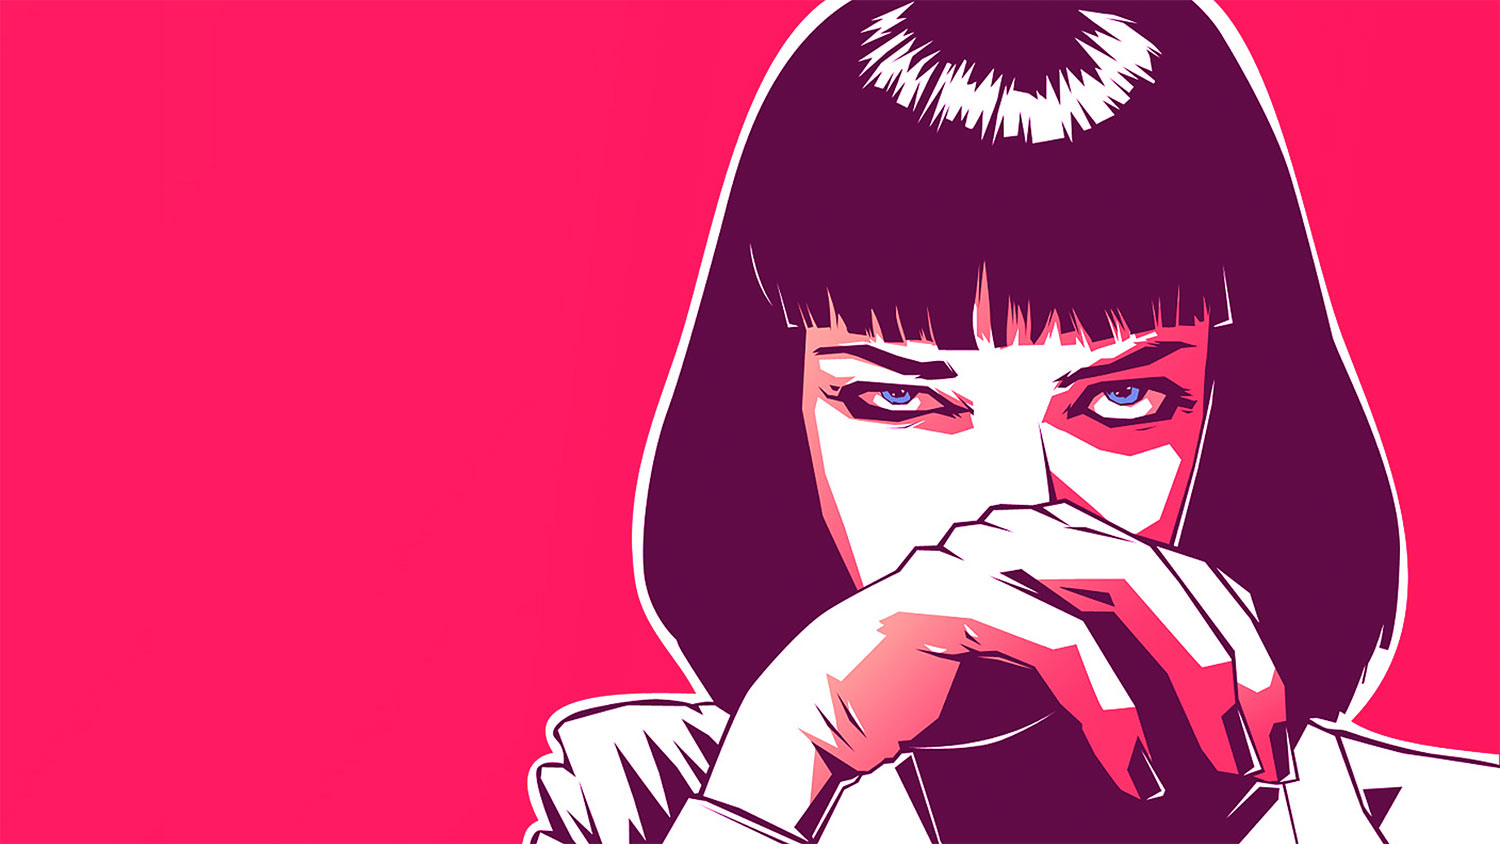 Cartoon of Uma Thurman's character in Pulp Fiction wiping her nose and looking at the camera